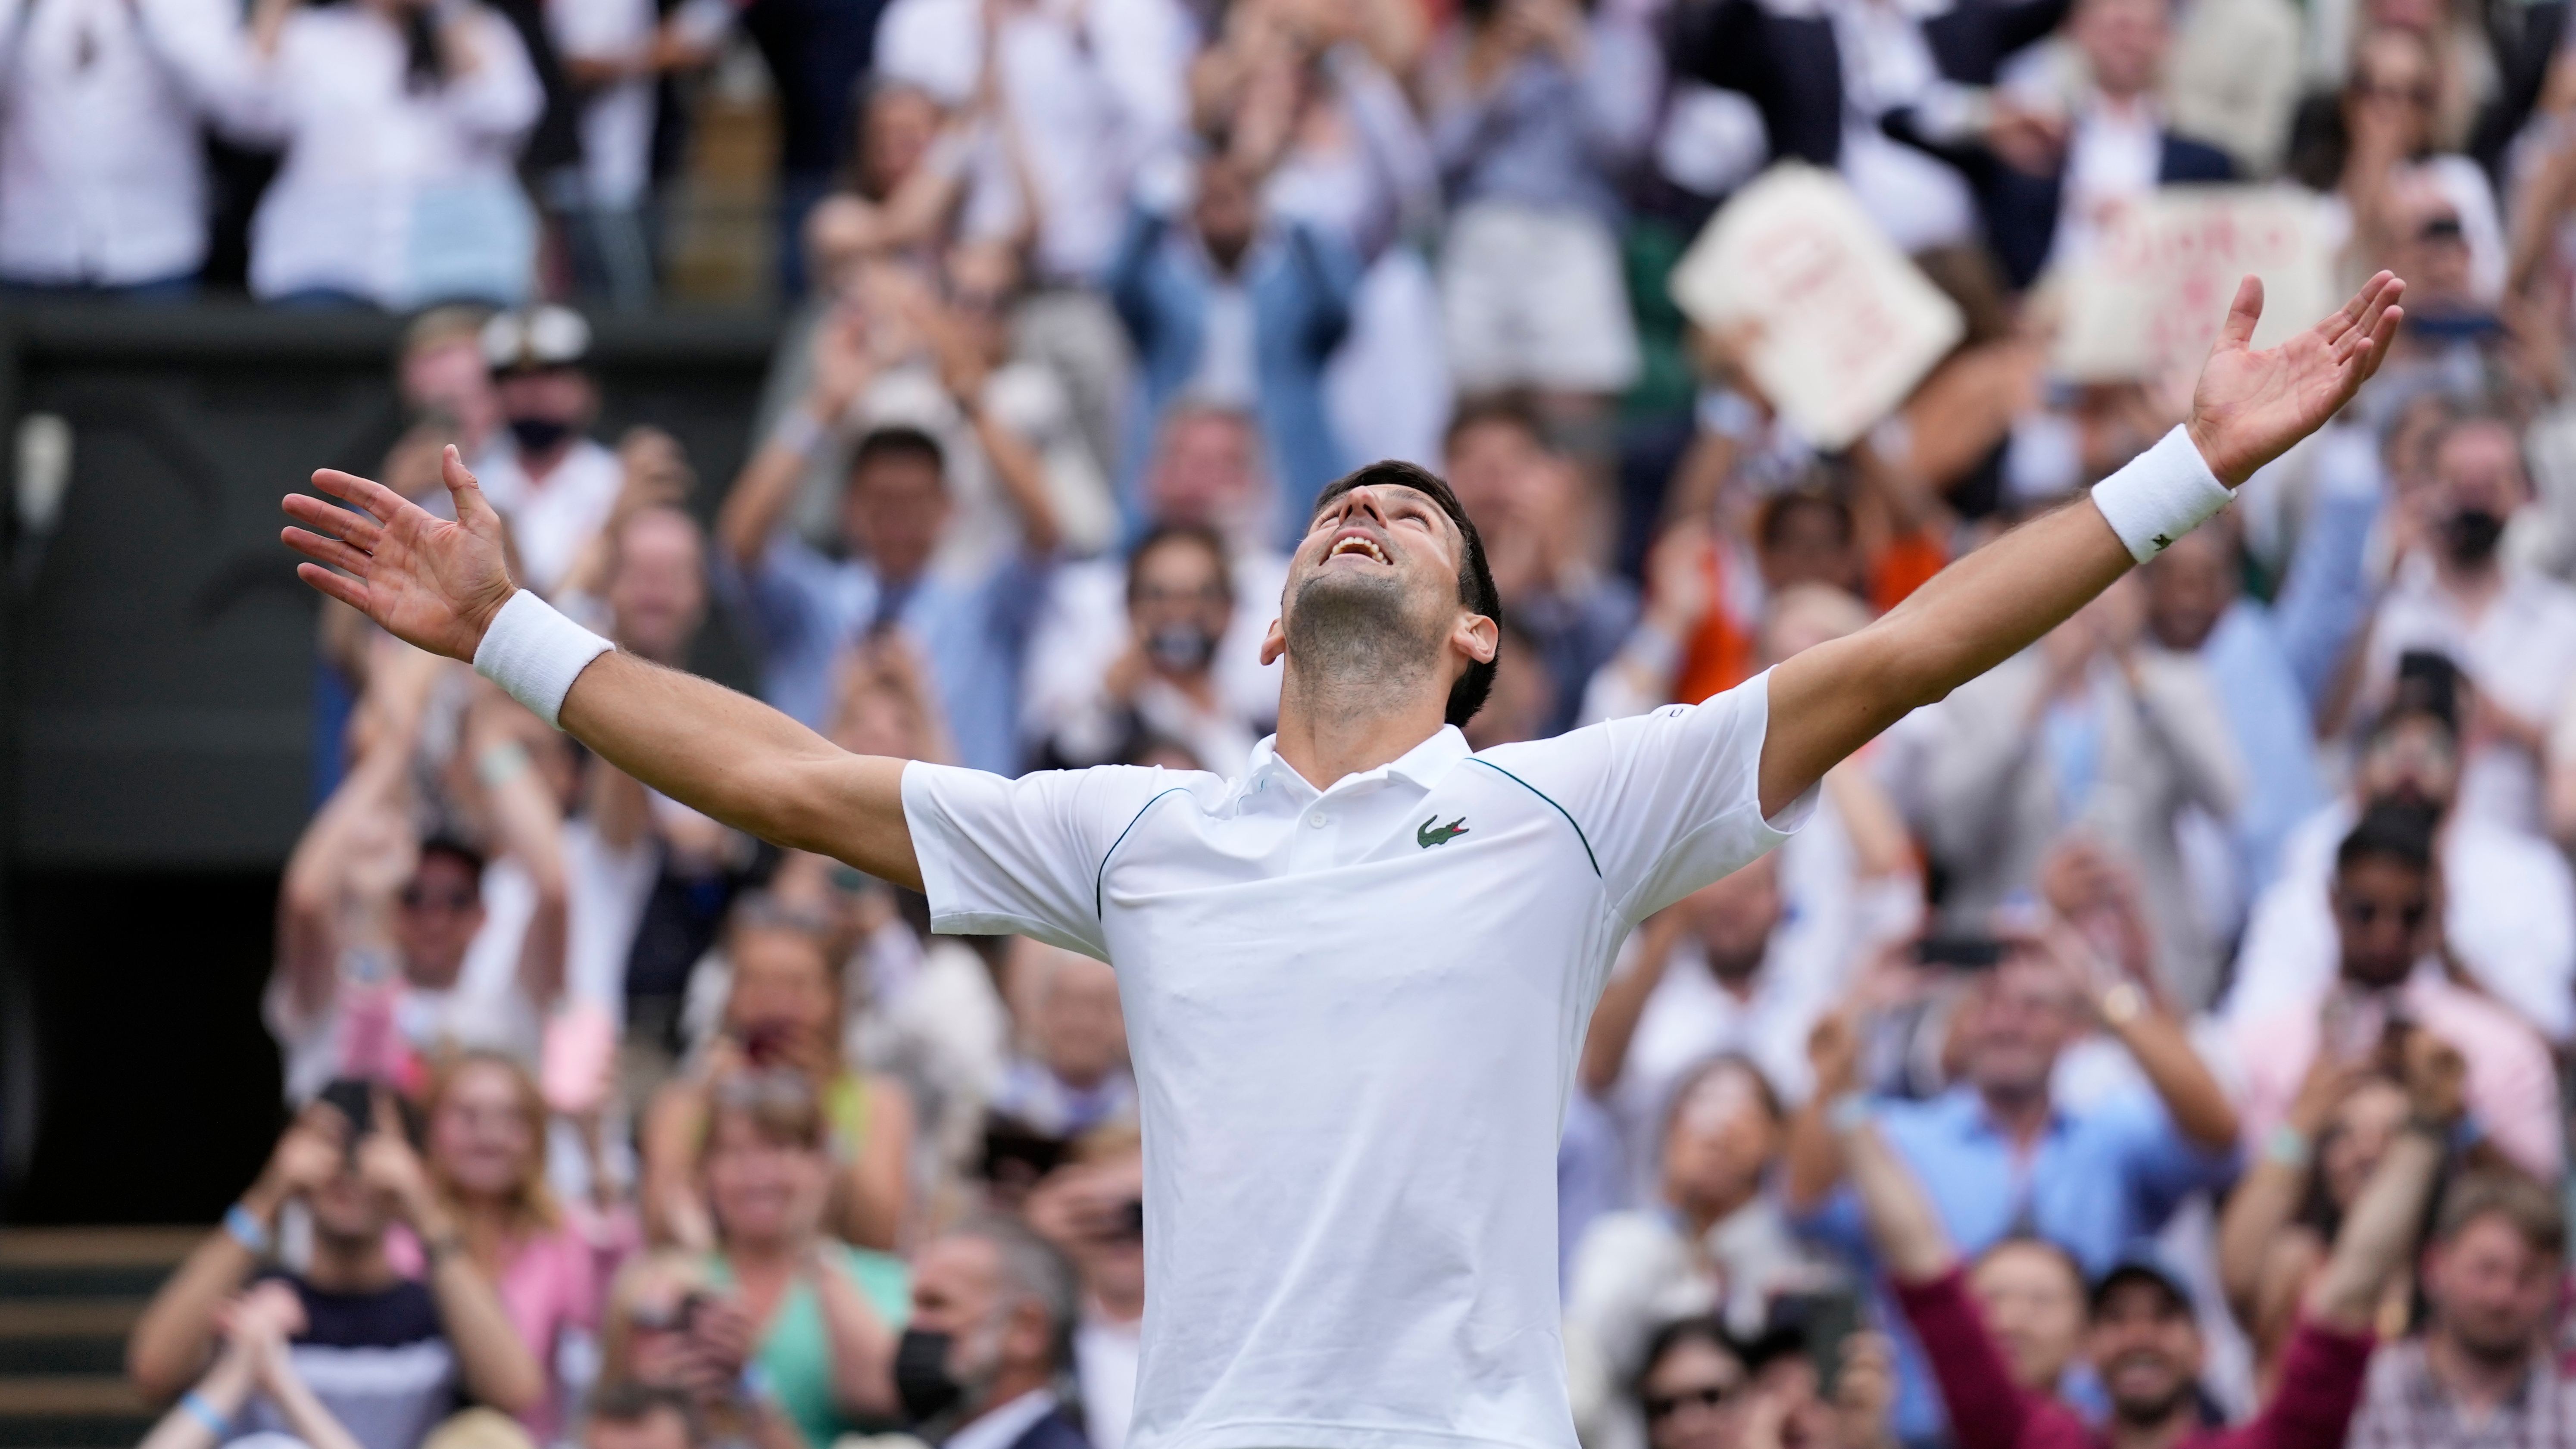 Roger Federer and Novak Djokovic make history by playing in first ever  fifth-set tie-breaker at Wimbledon 2019 – The Sun